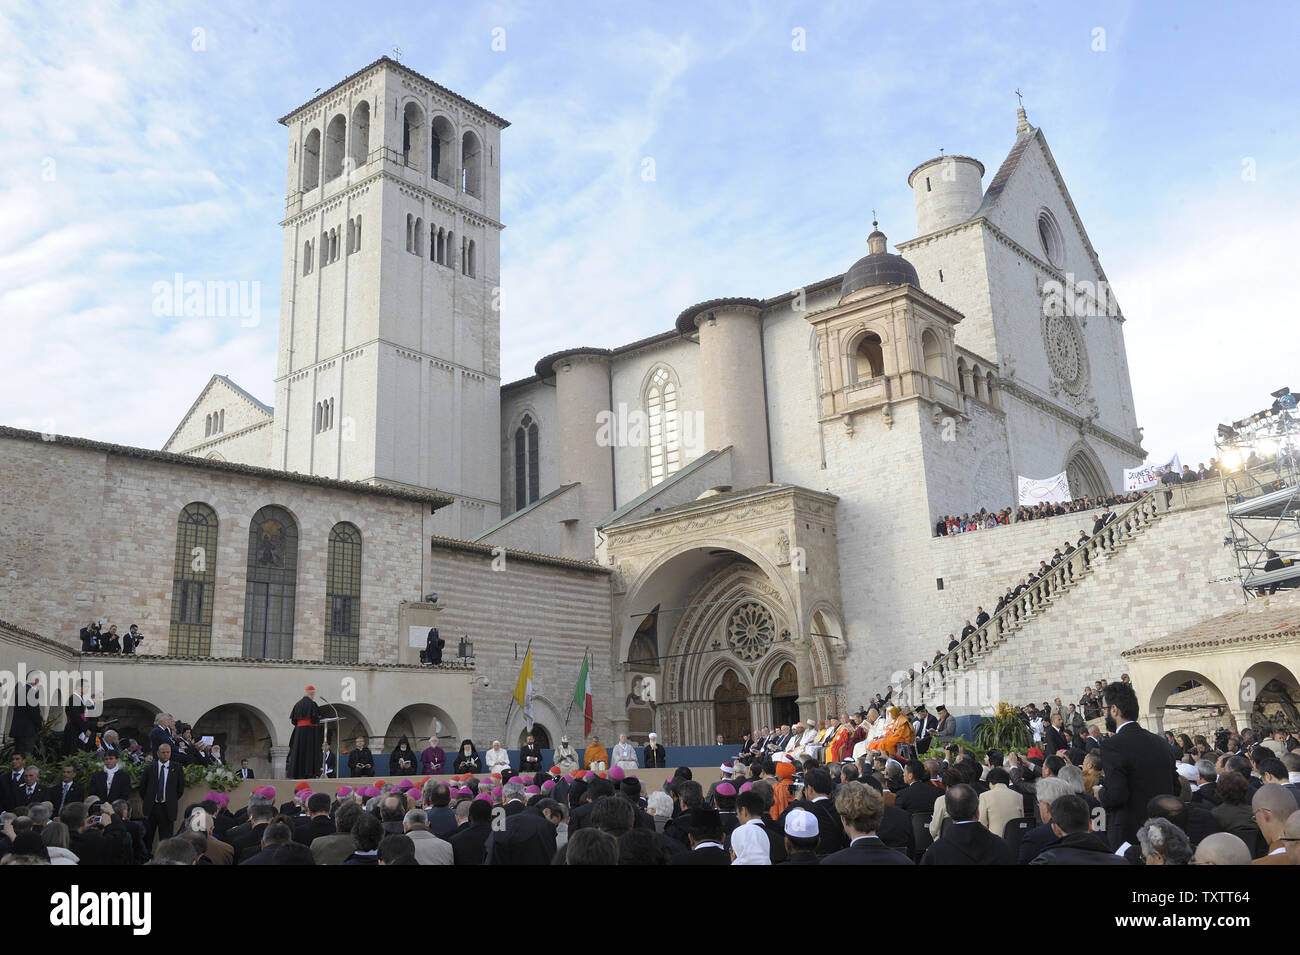 Religious leaders, including Benedict XVI, meet outside Basilica of San Francesco during the interreligious talks on October 27, 2011 in Assisi, Italy. Pope Benedict XVI The Pope met with approximately 300 religious leaders and atheist intellectuals, to mark the 25th anniversary of the Assisi interfaith gathering. UPI/Stefano Spaziani Stock Photo